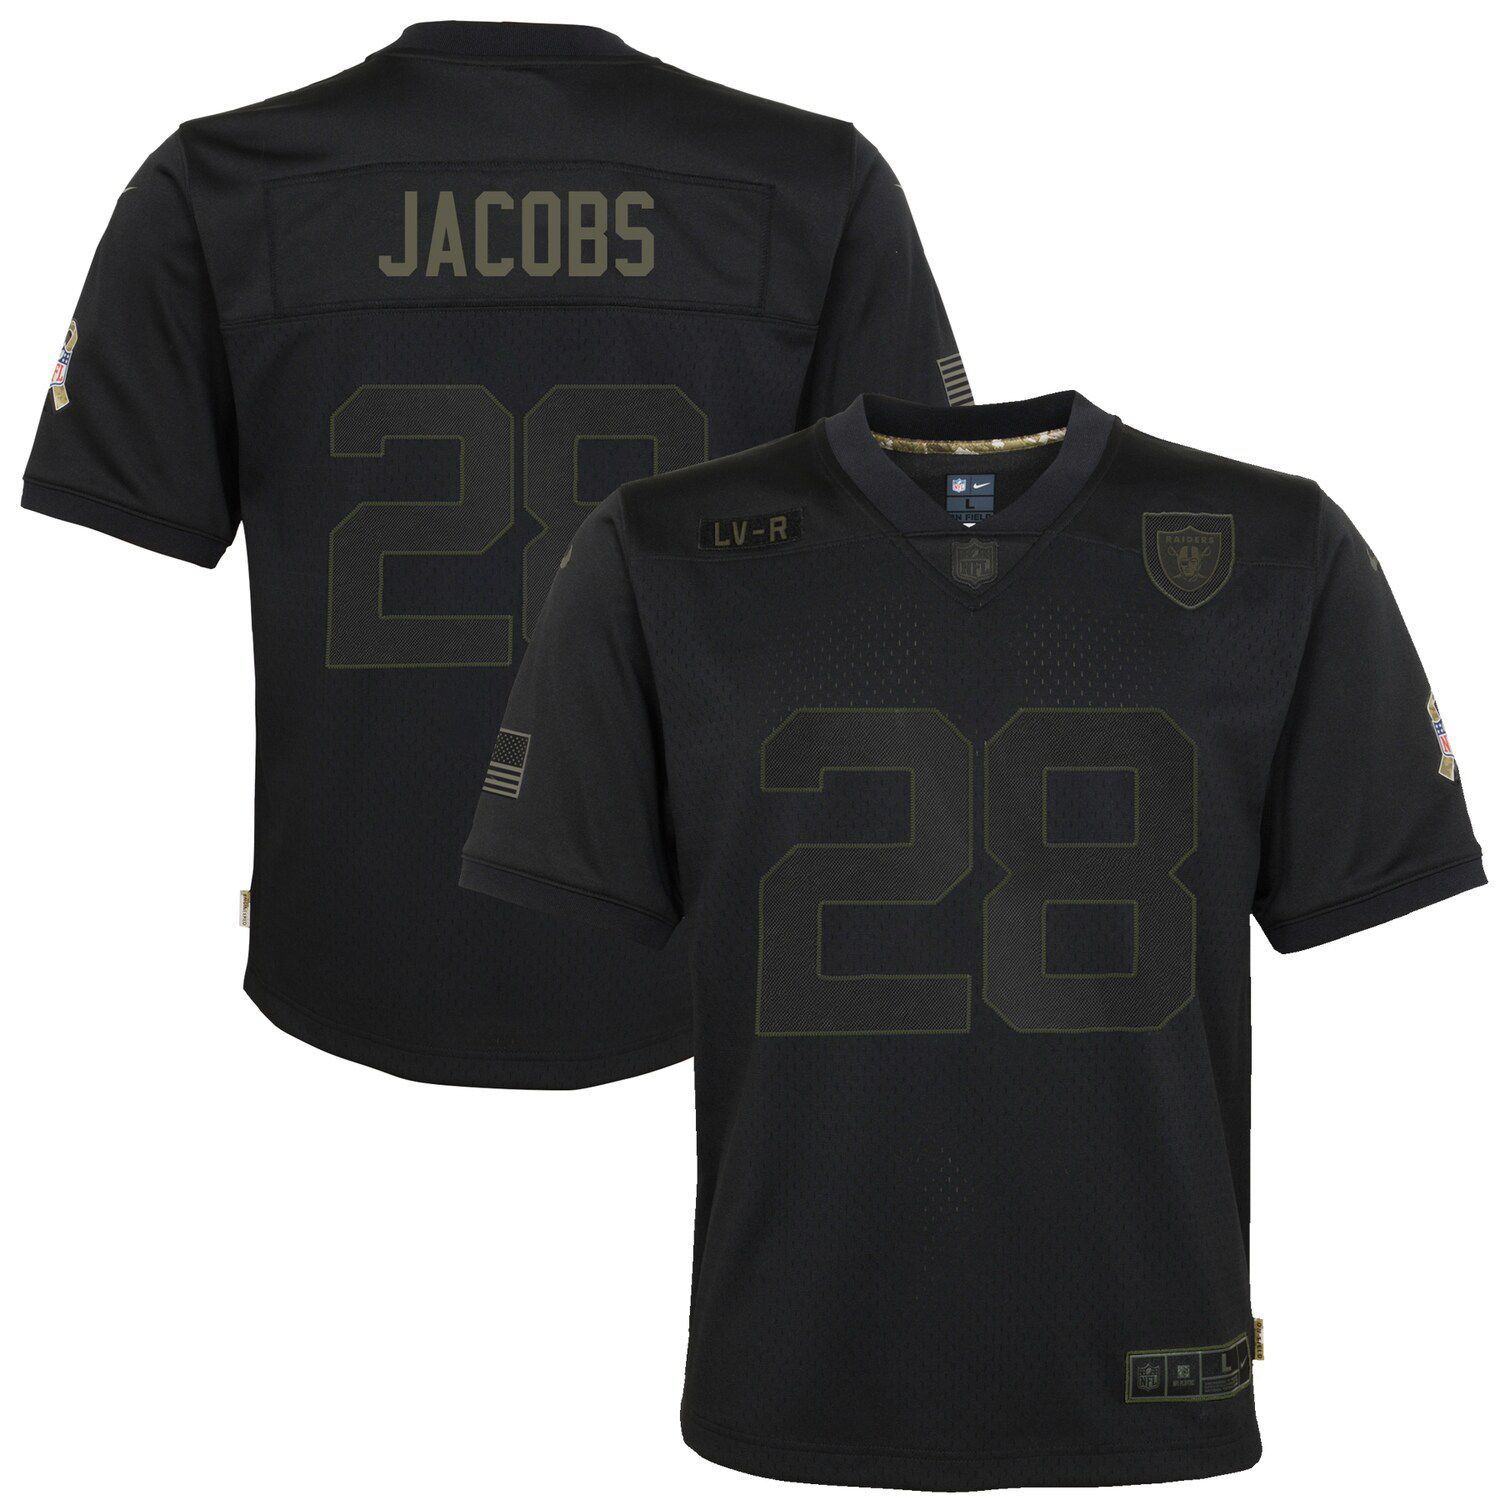 black salute to service jersey